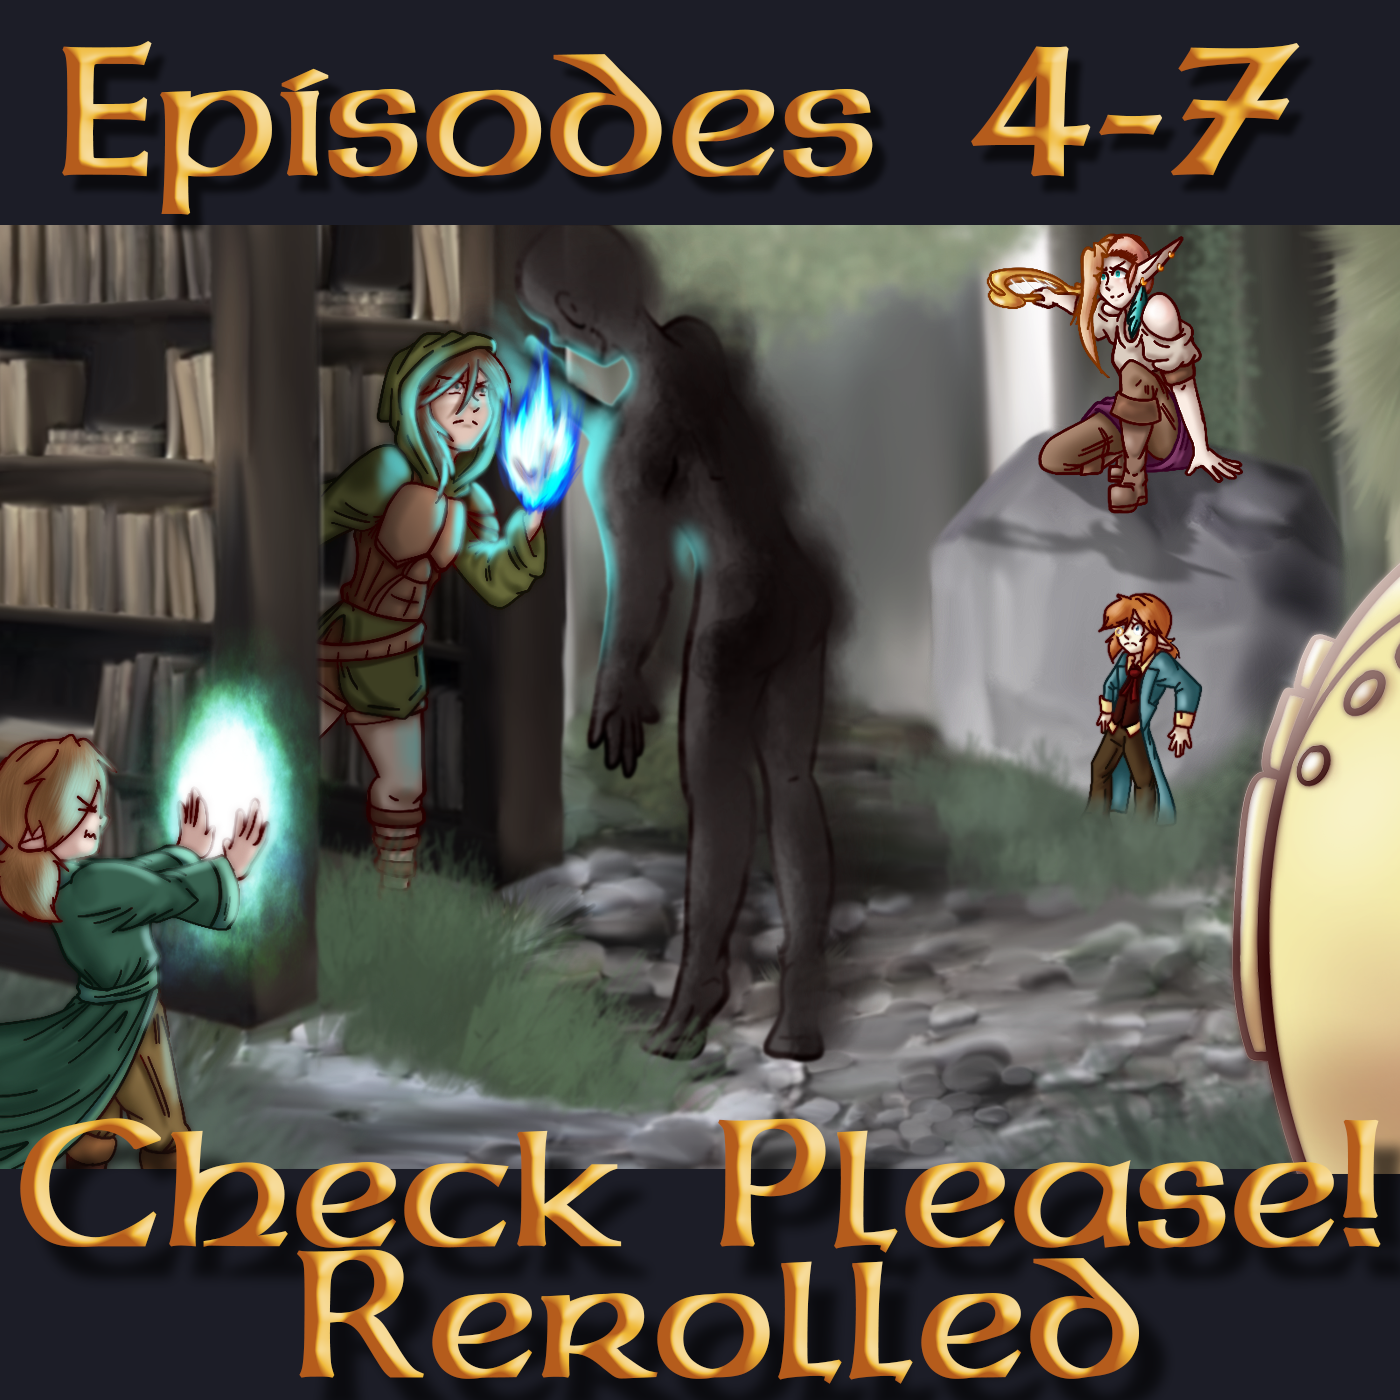 Check Please! Rerolled S1 E4-7: The Deadlands